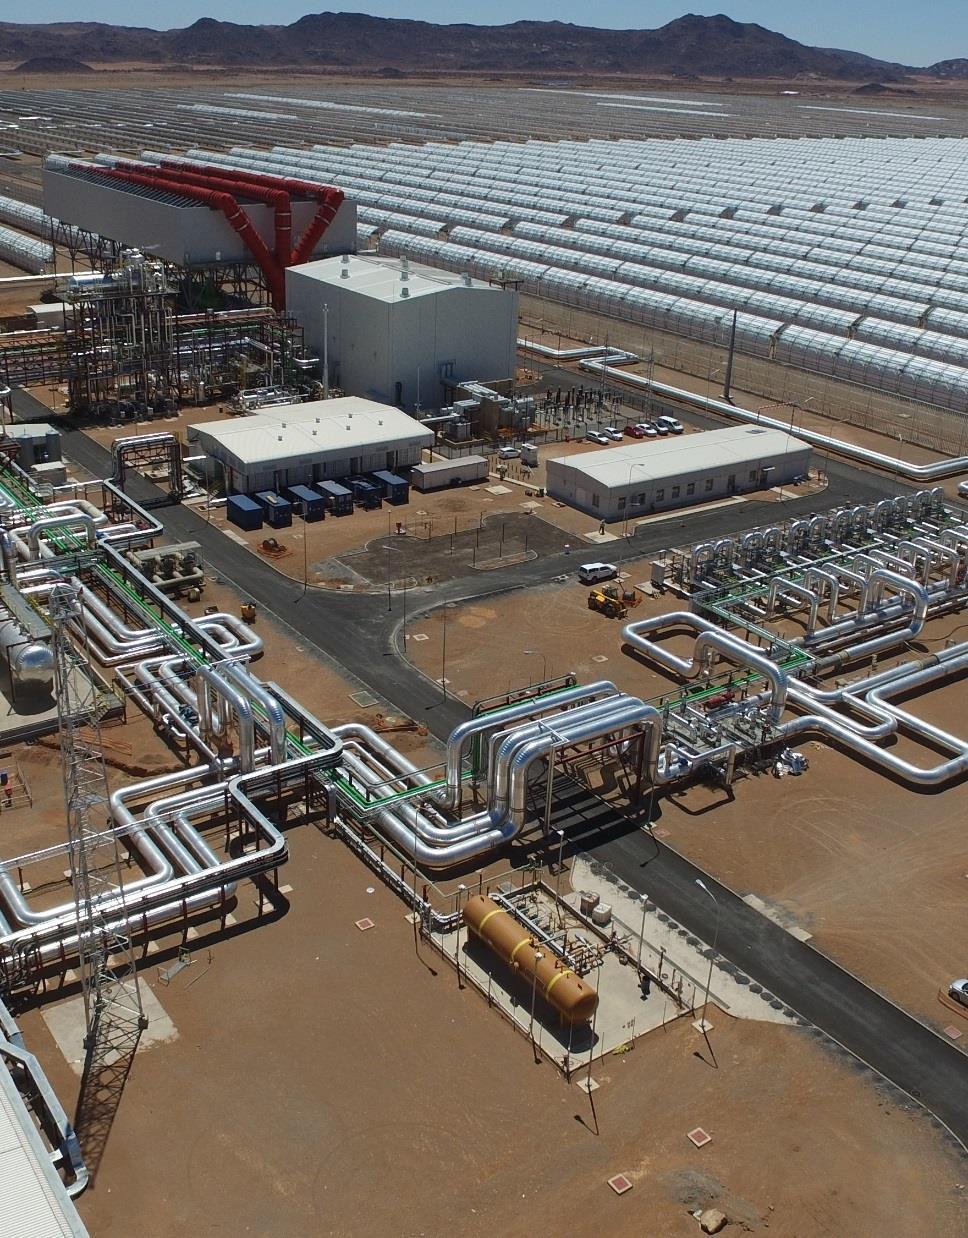 XINA Poffadder Northern Cape Parabolic Trough System Size: 100 MW Configuration: Indirect with Thermal Storage Storage: Moten Salt (48,000 tons) 6 hrs (1,650MWh) Heat Exchanger: Shell and tube